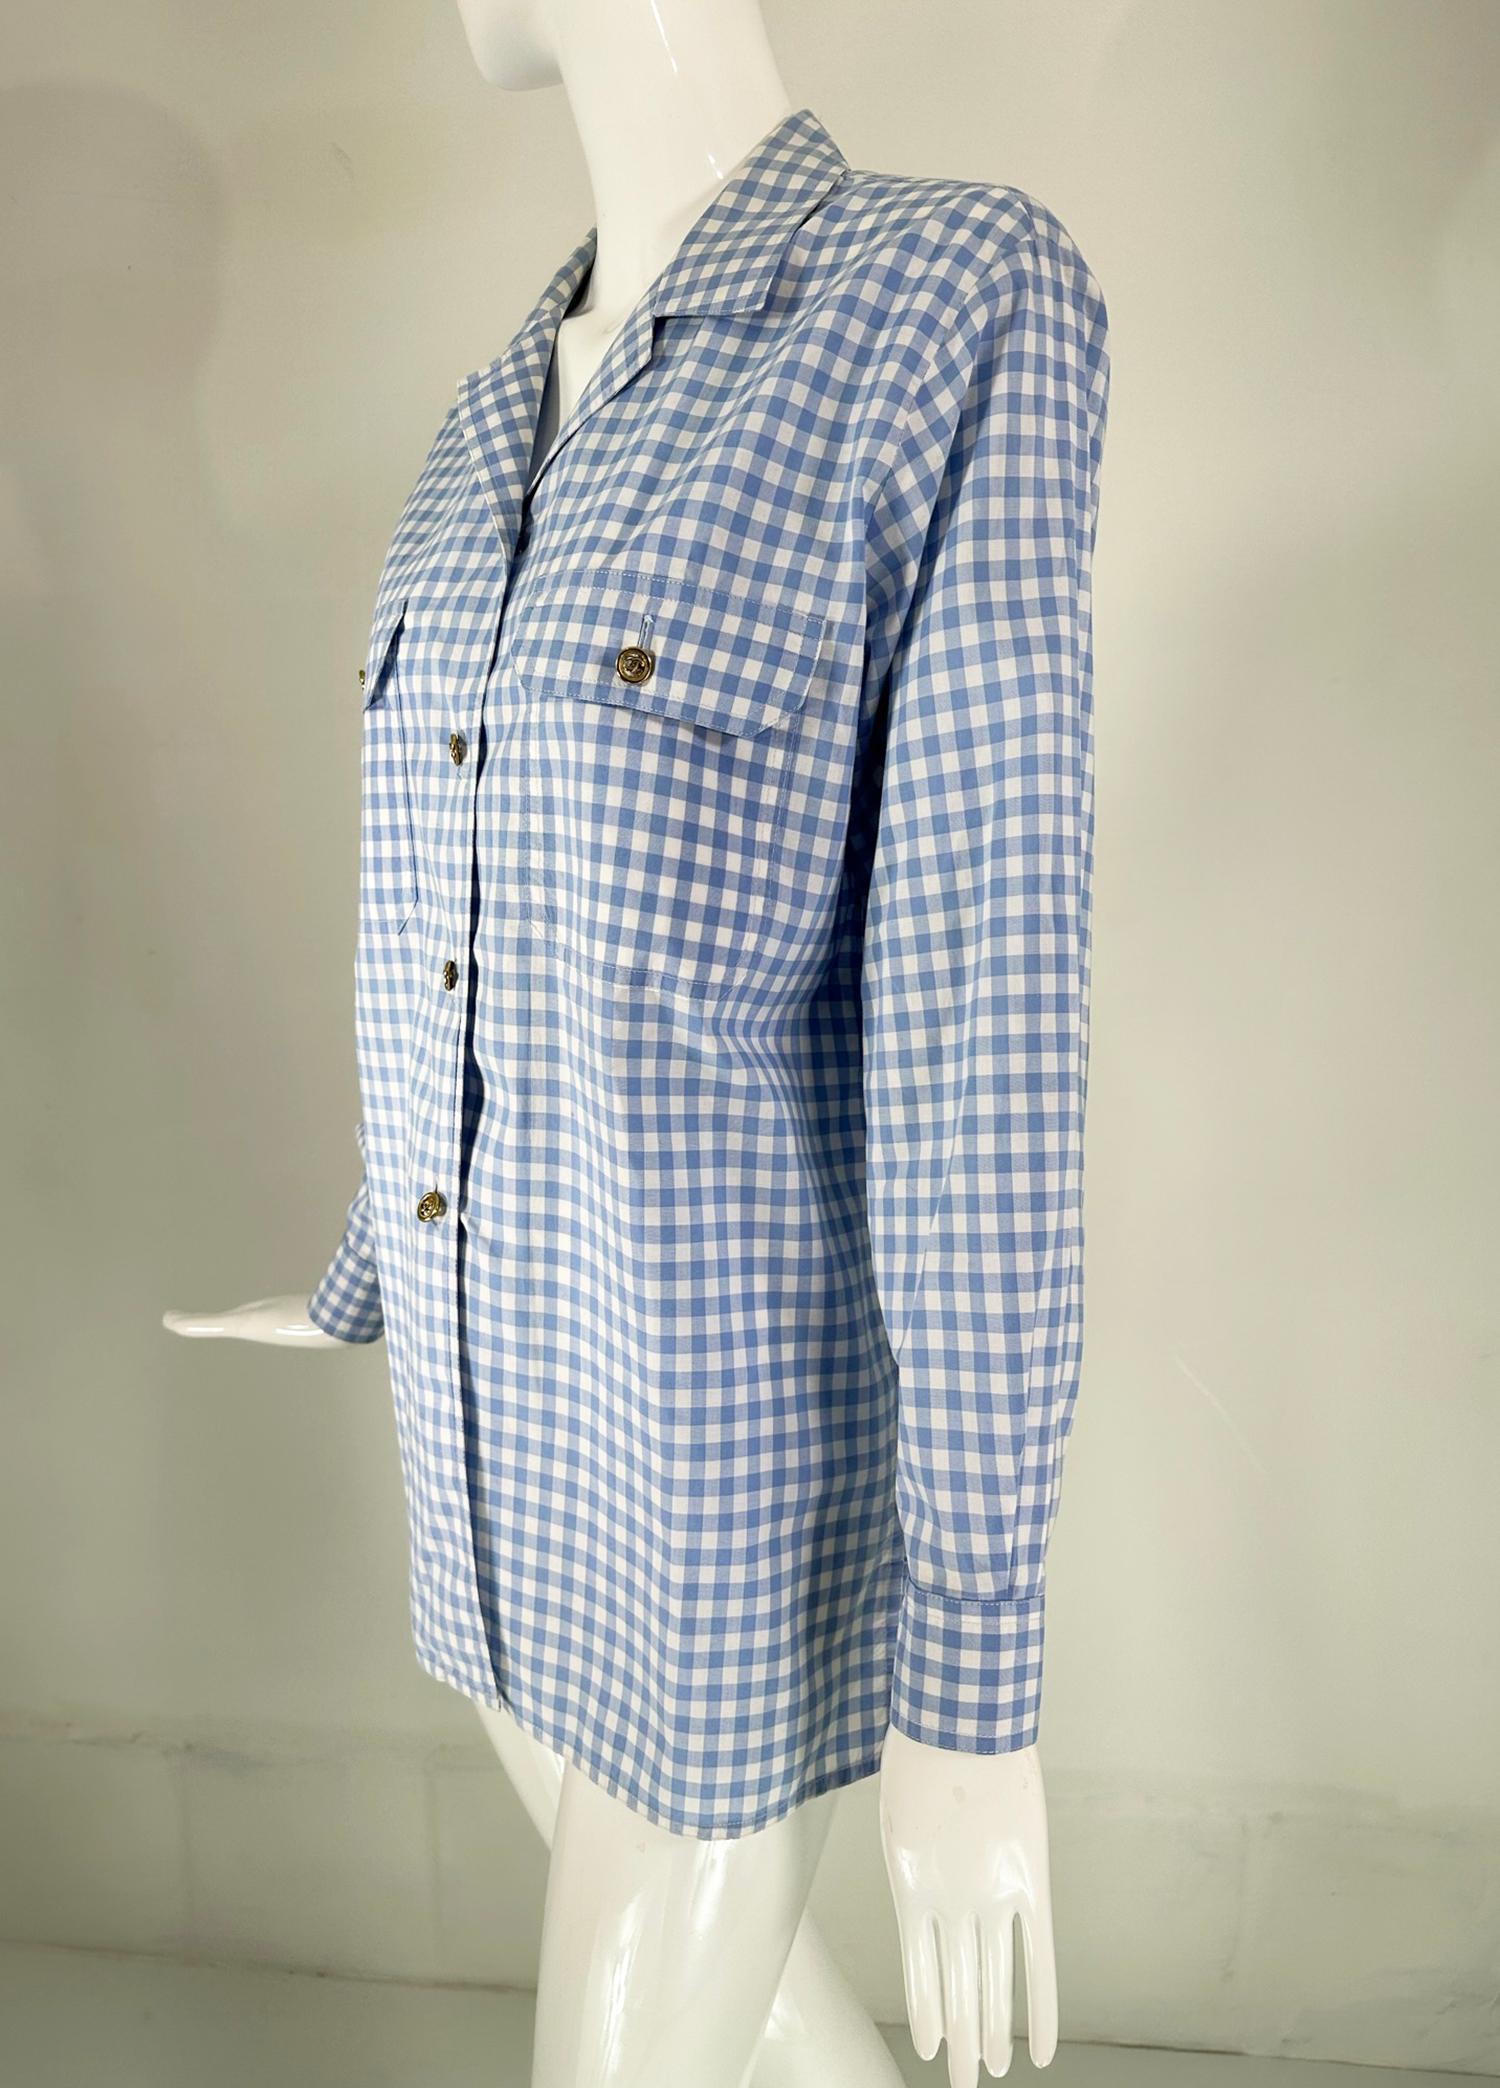 Chanel S/S 1995 blue & white gingham check blouse. Long sleeves with Chanel embroidered on each sleeve wrist. The over size blouse closes at the front with gold Chanel buttons, there are Chanel buttons at each wrist & Chanel button closures at each